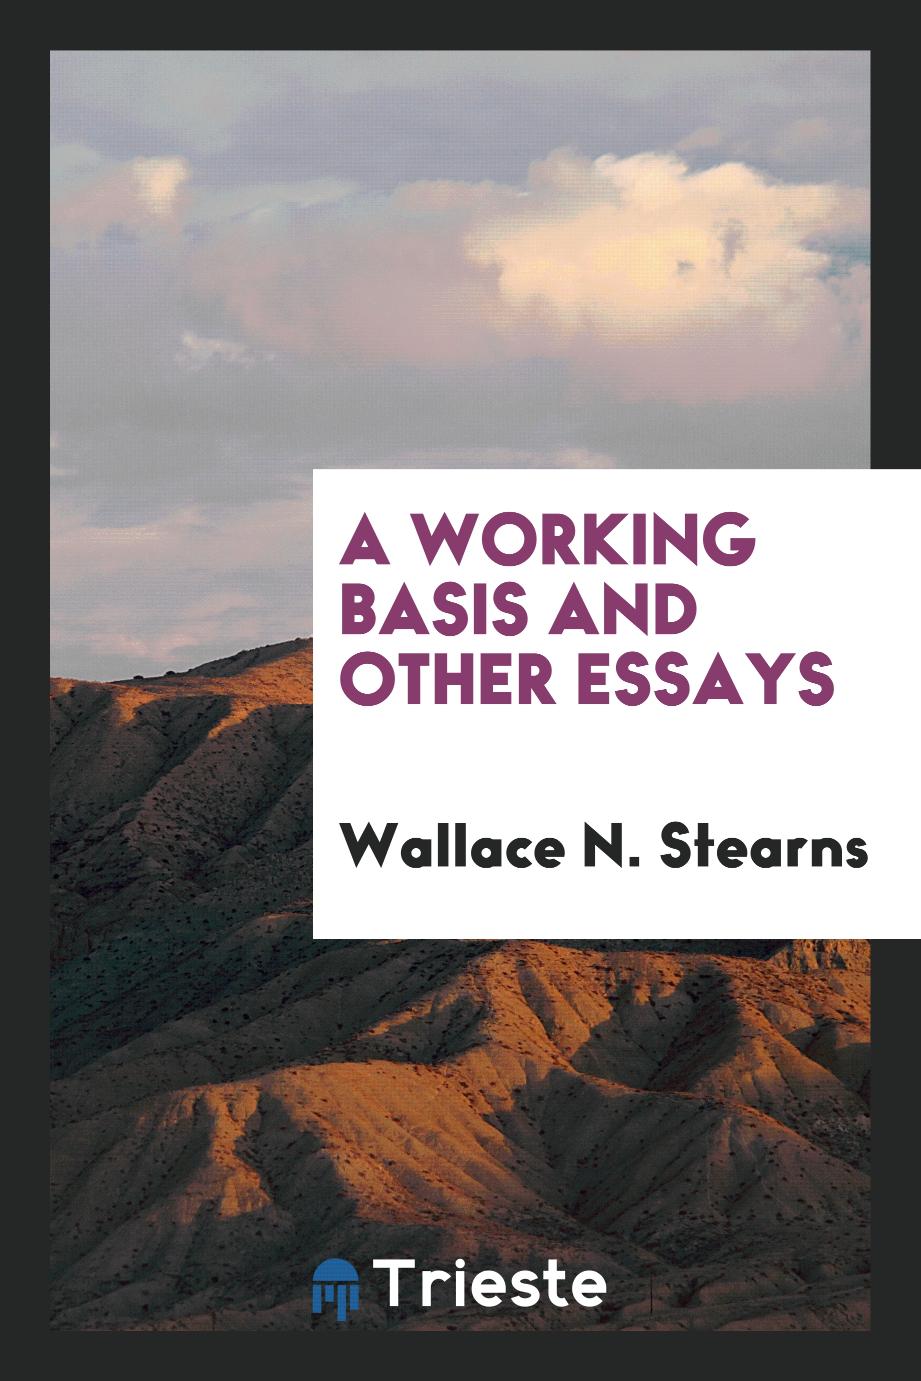 A Working Basis and Other Essays